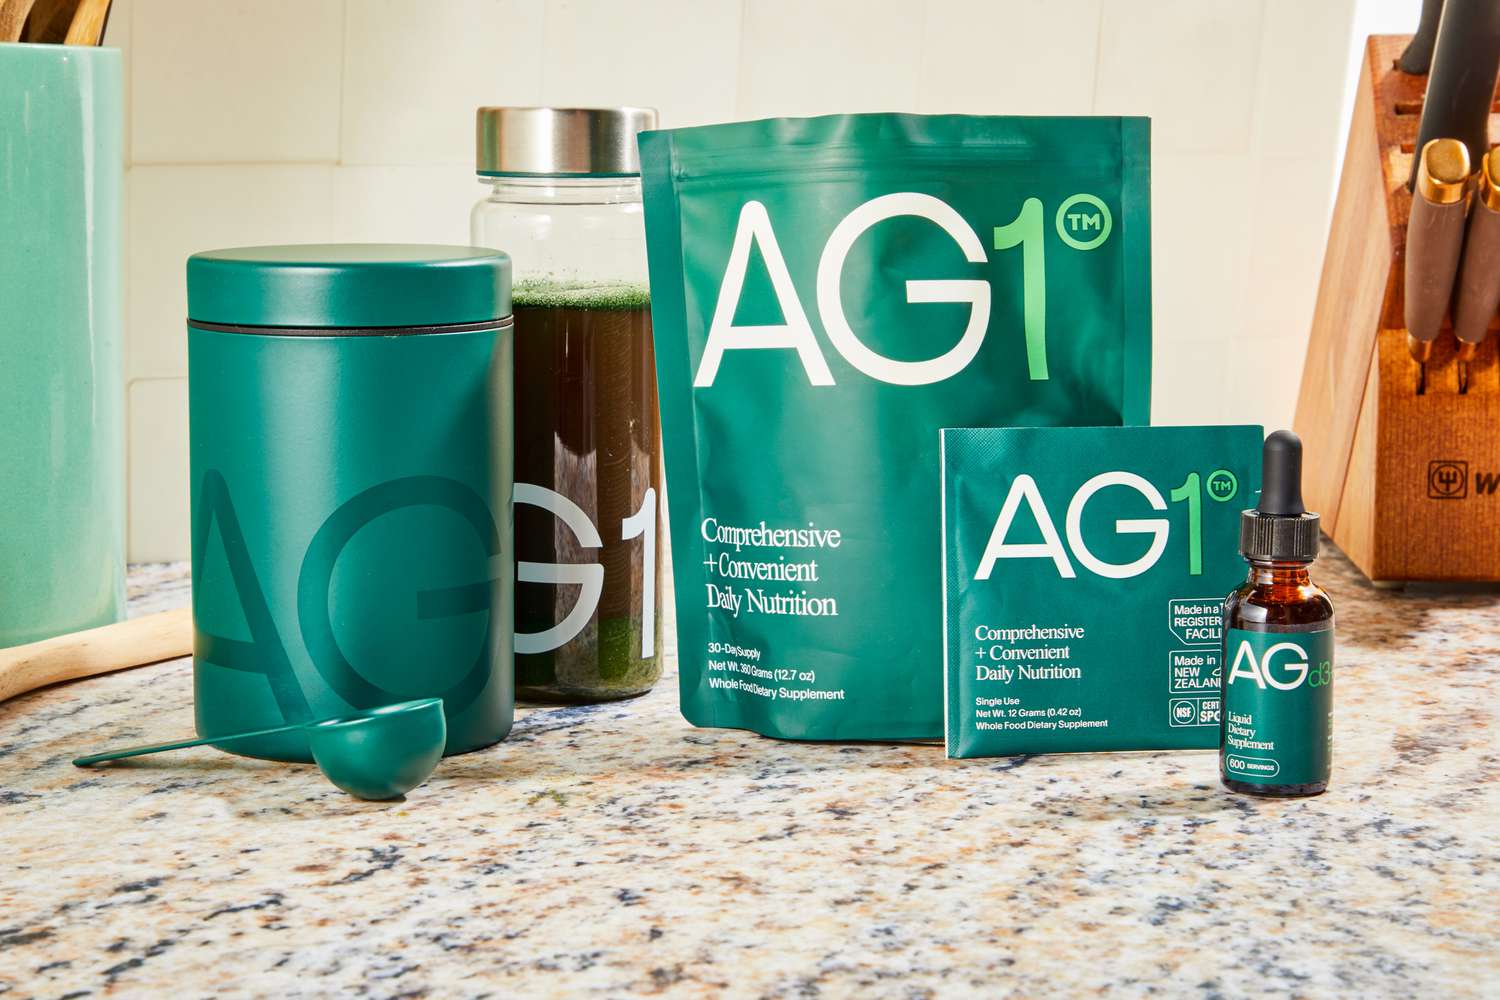 Containers of AG1 by Athletic Greens displayed on a kitchen counter